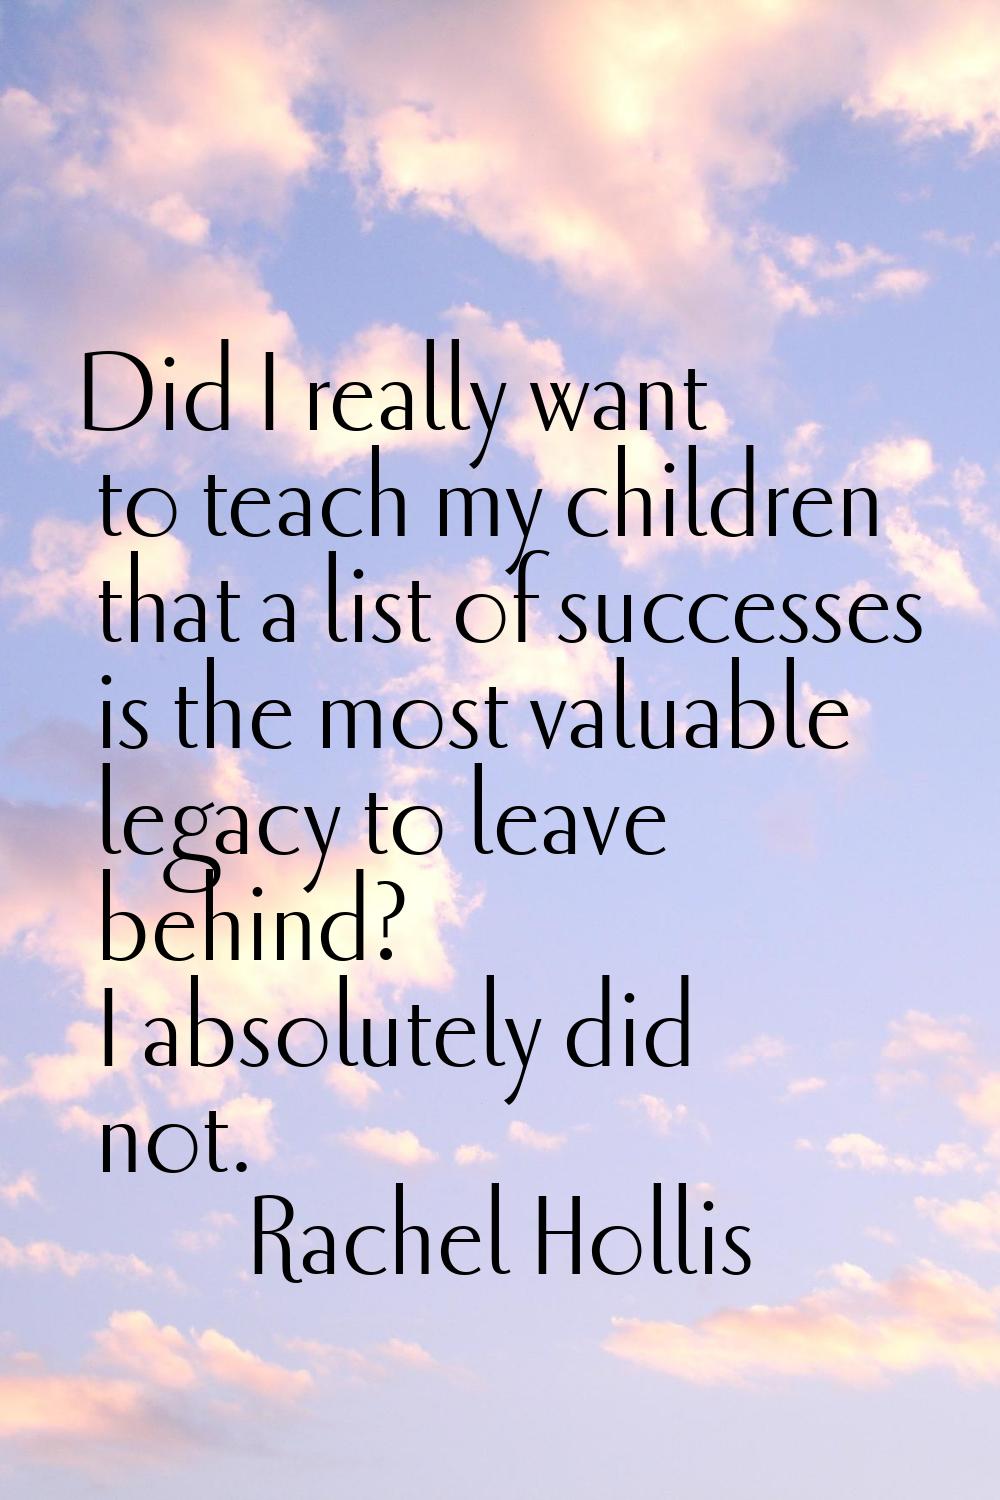 Did I really want to teach my children that a list of successes is the most valuable legacy to leav